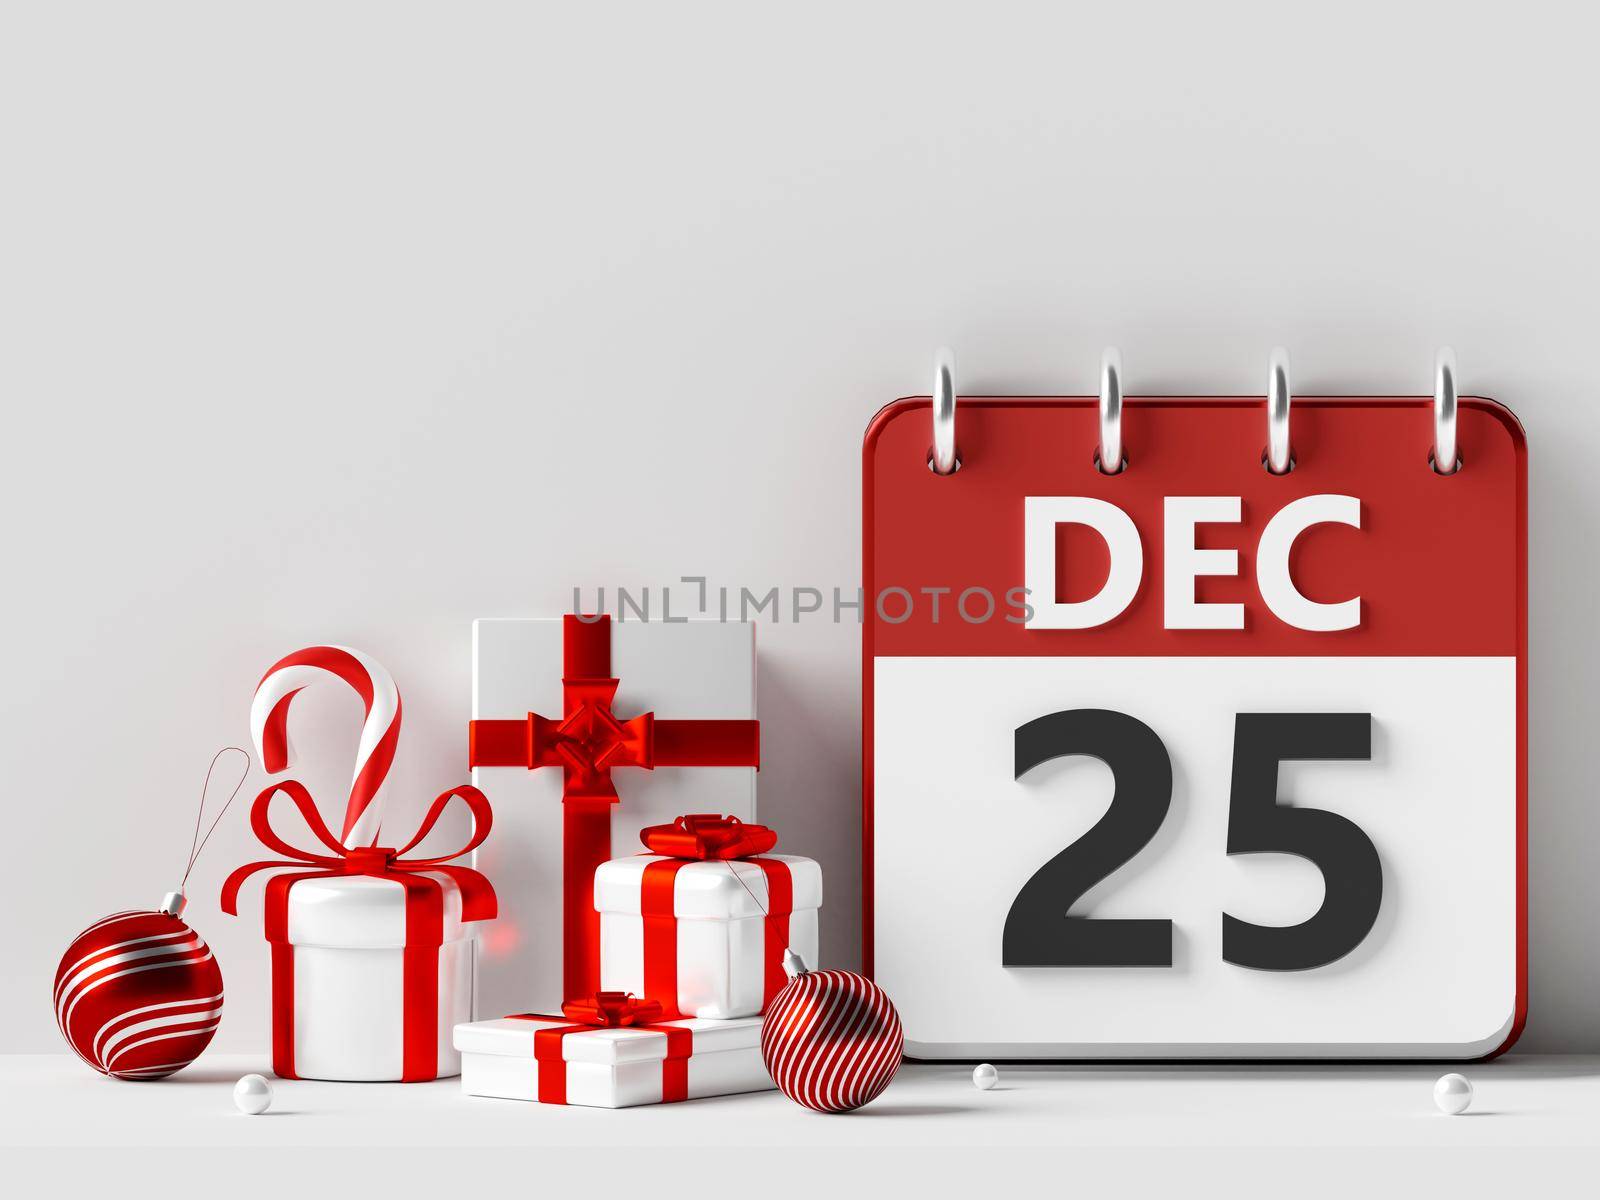 3d illustration of 25 DEC Christmas day on calendarwith gift box